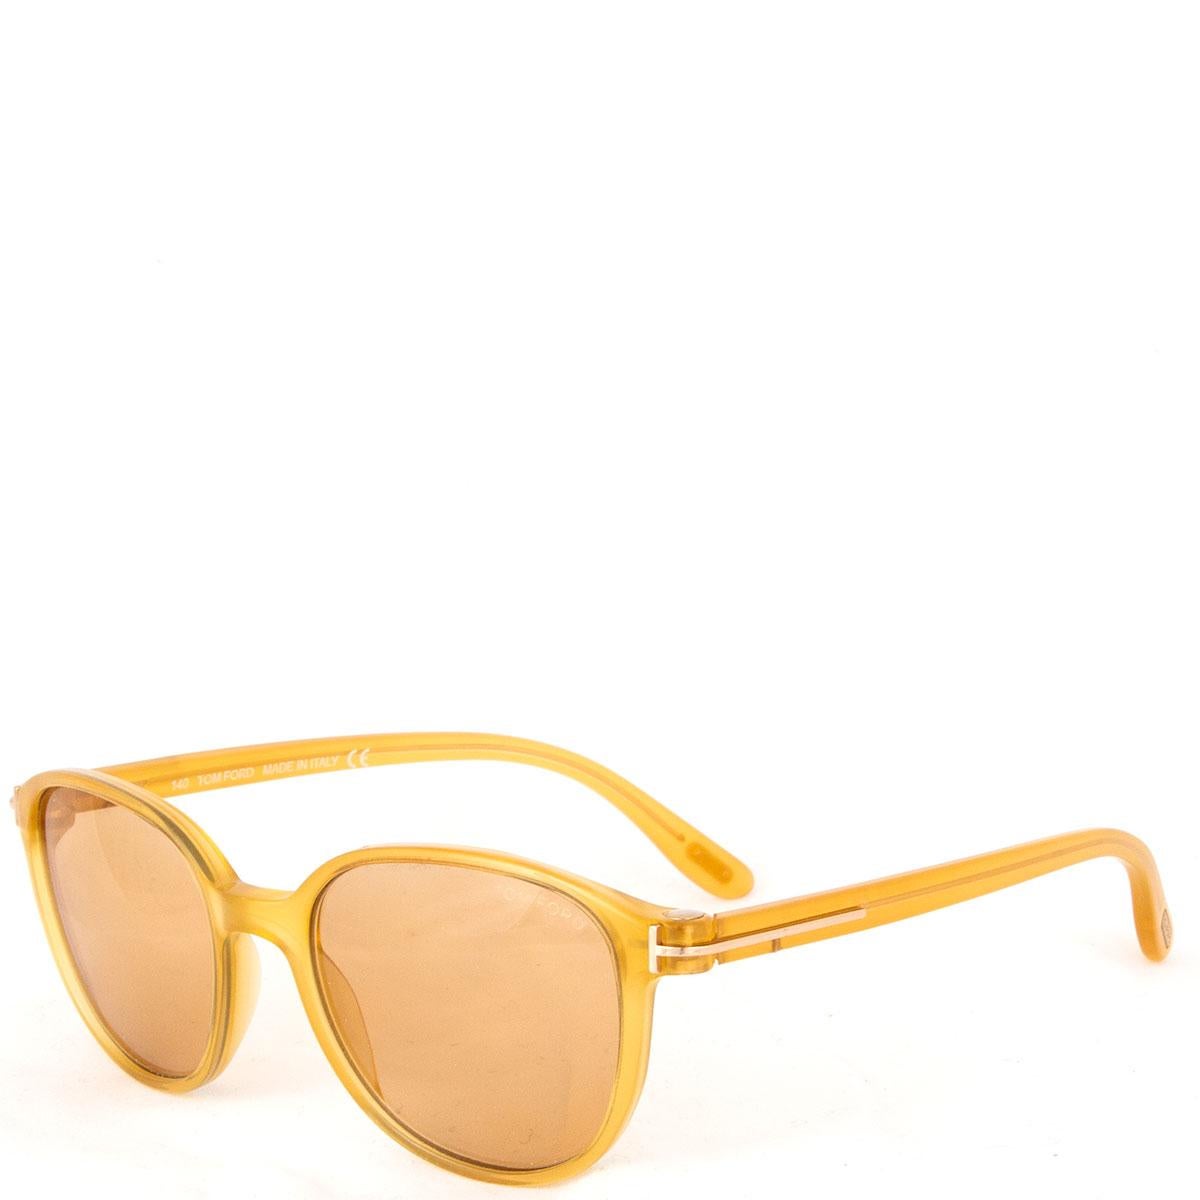 100% authentic Tom Ford 'Spencer' sunglasses in light mustard acetate with light mustard lenses. Has been worn and is in excellent condition. Comes with Valentino case. 


Measurements
Width	12.5cm (4.9in)
Height	4.5cm (1.8in)


All our listings